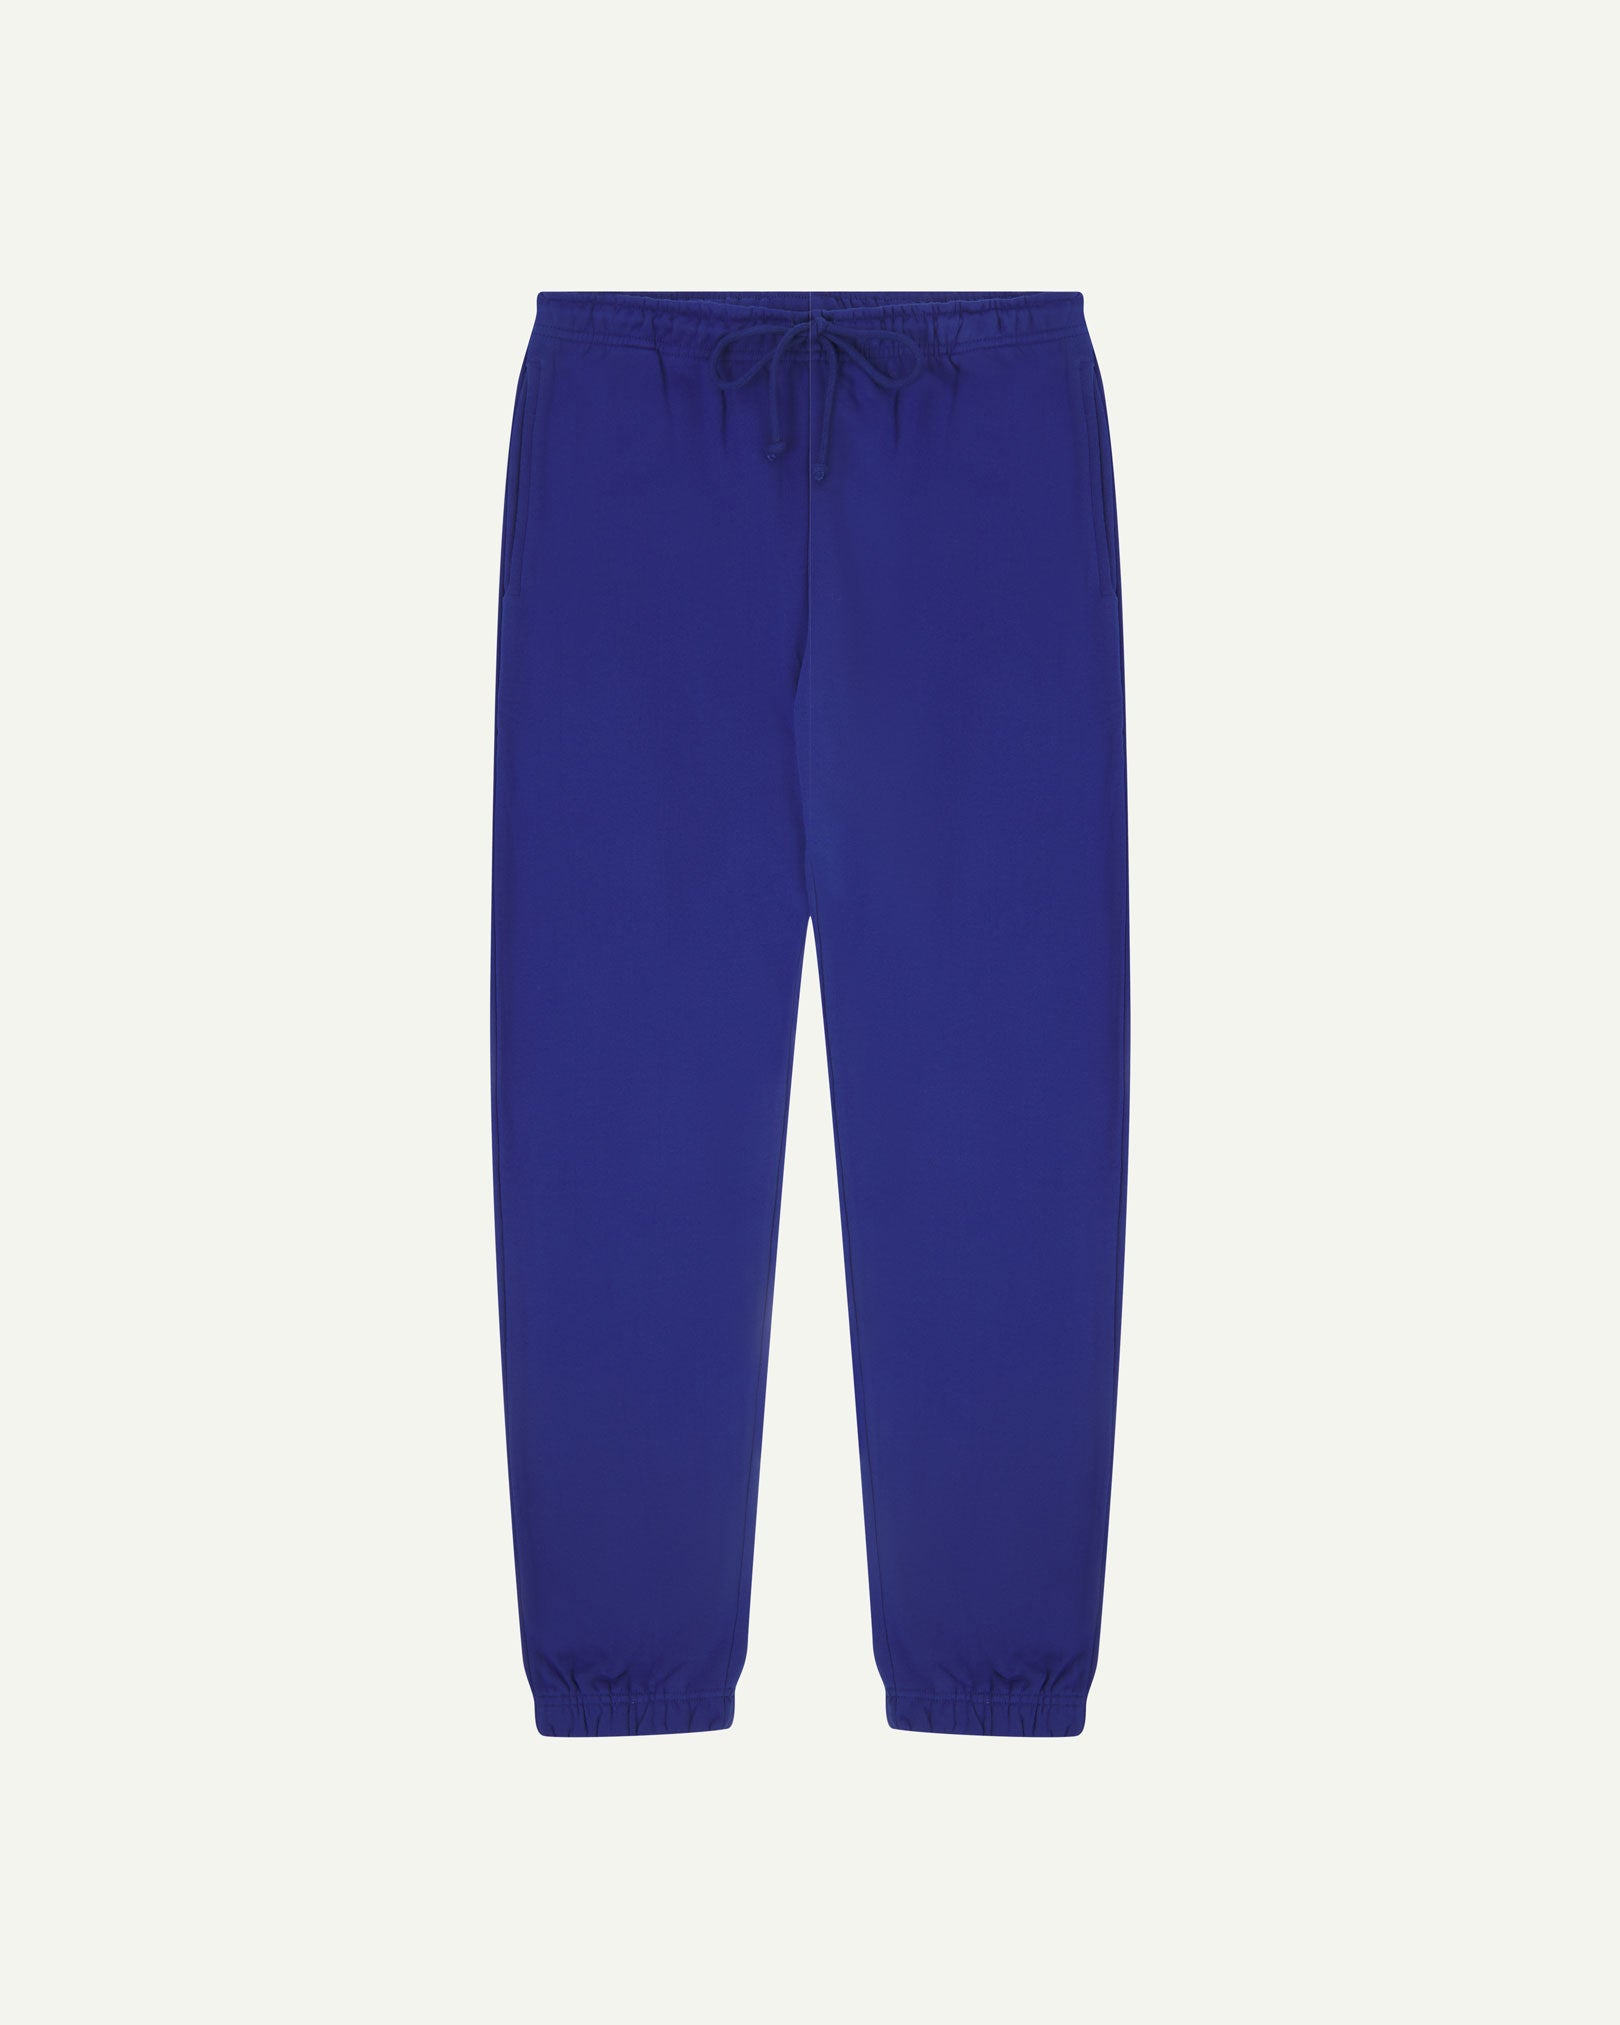 Front view of Uskees jogging pants in ultra-blue organic cotton.